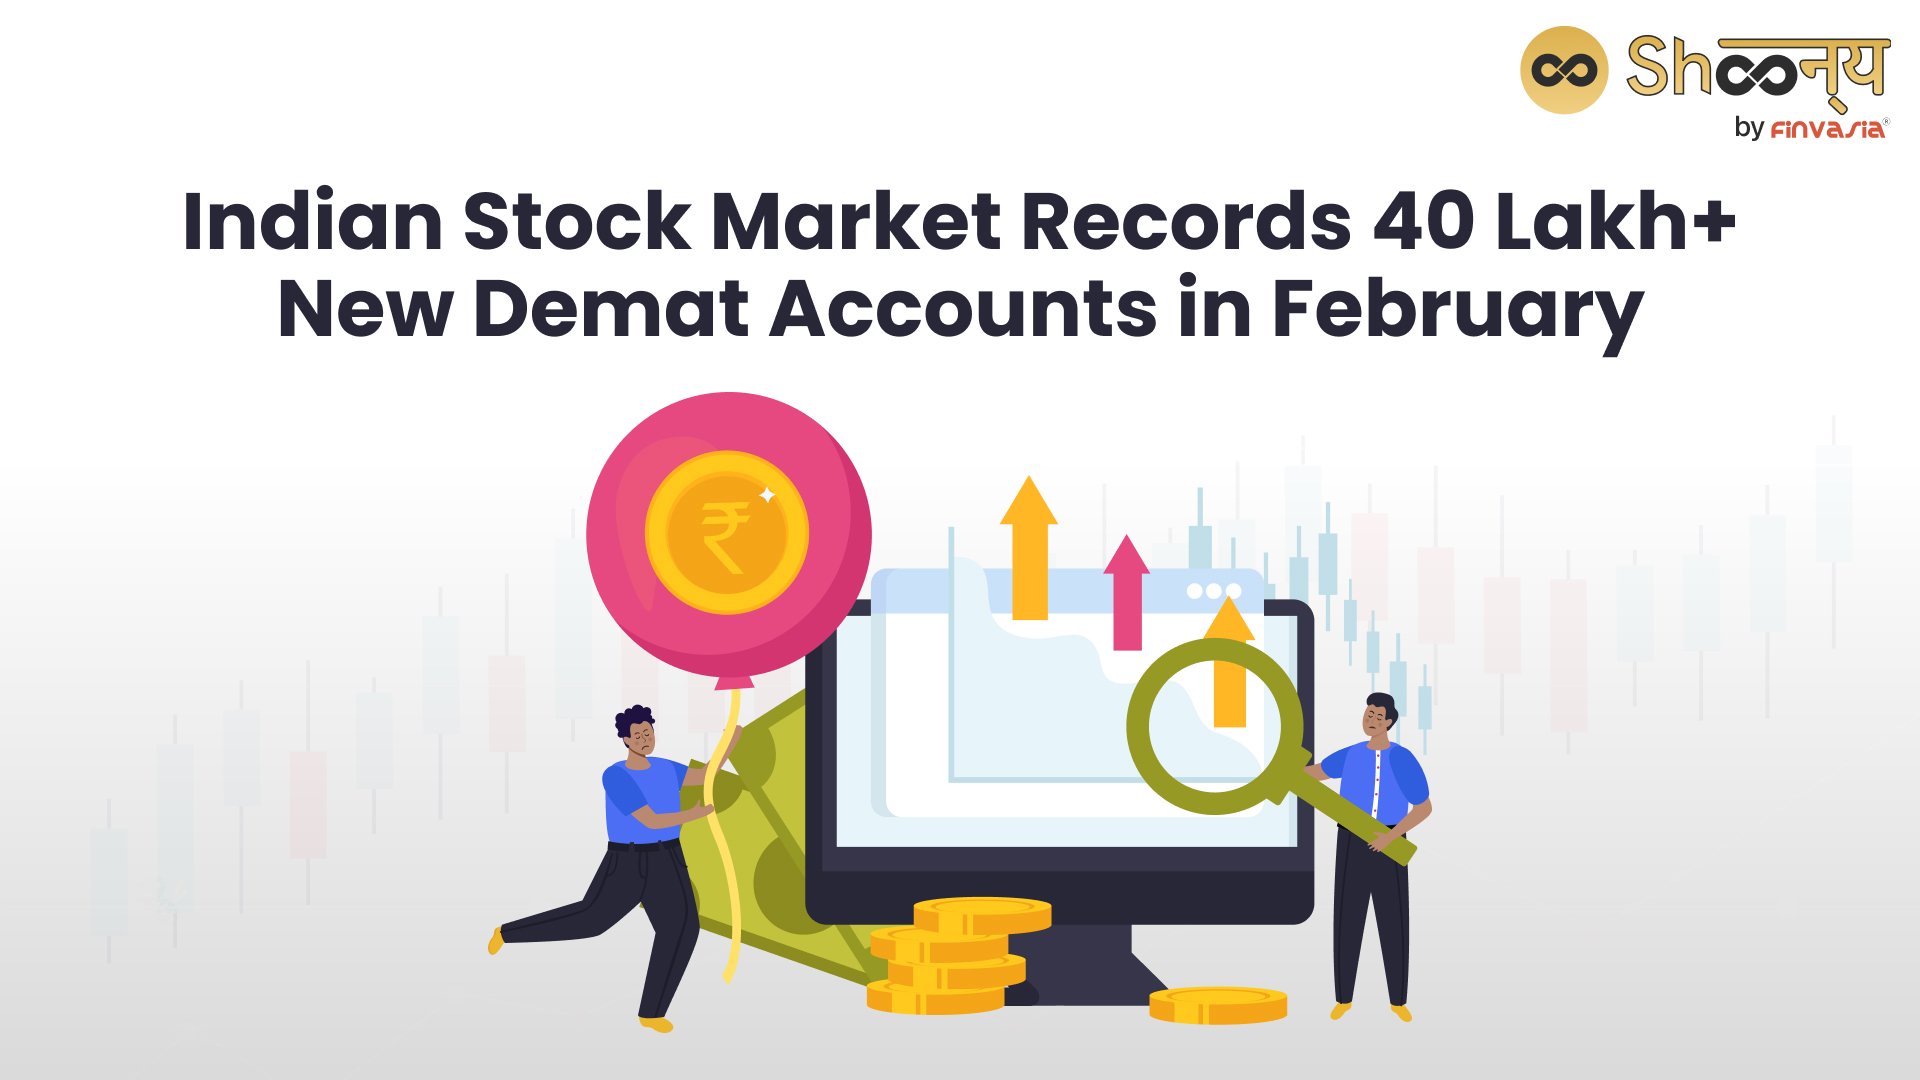 New Demat Accounts in India Cross 40 Lakh Mark in February